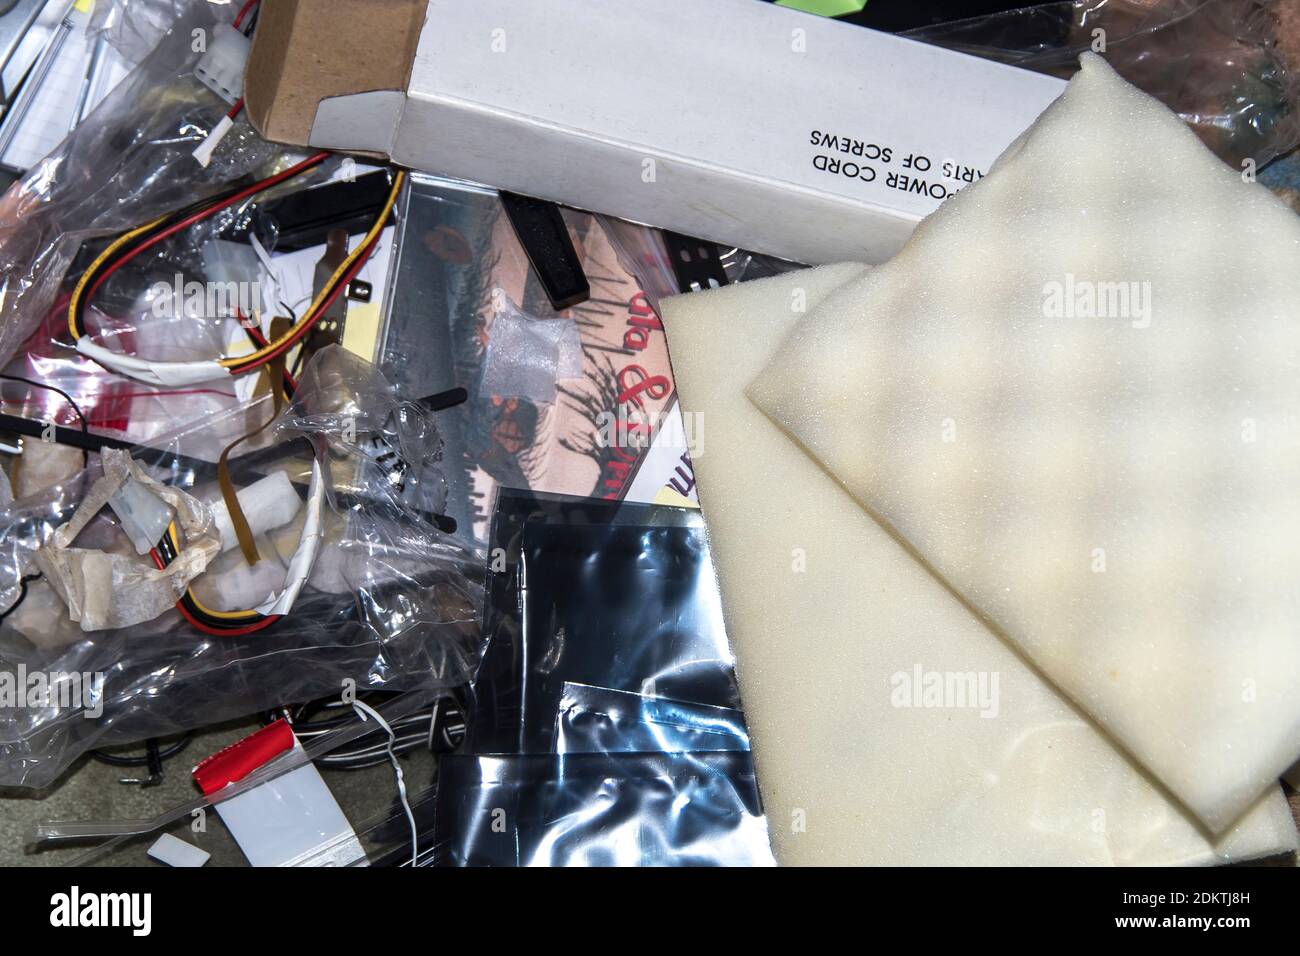 Old, obsolete computer parts and equipment about to be recycled or thrown out. Accumulation of e-waste. Stock Photo